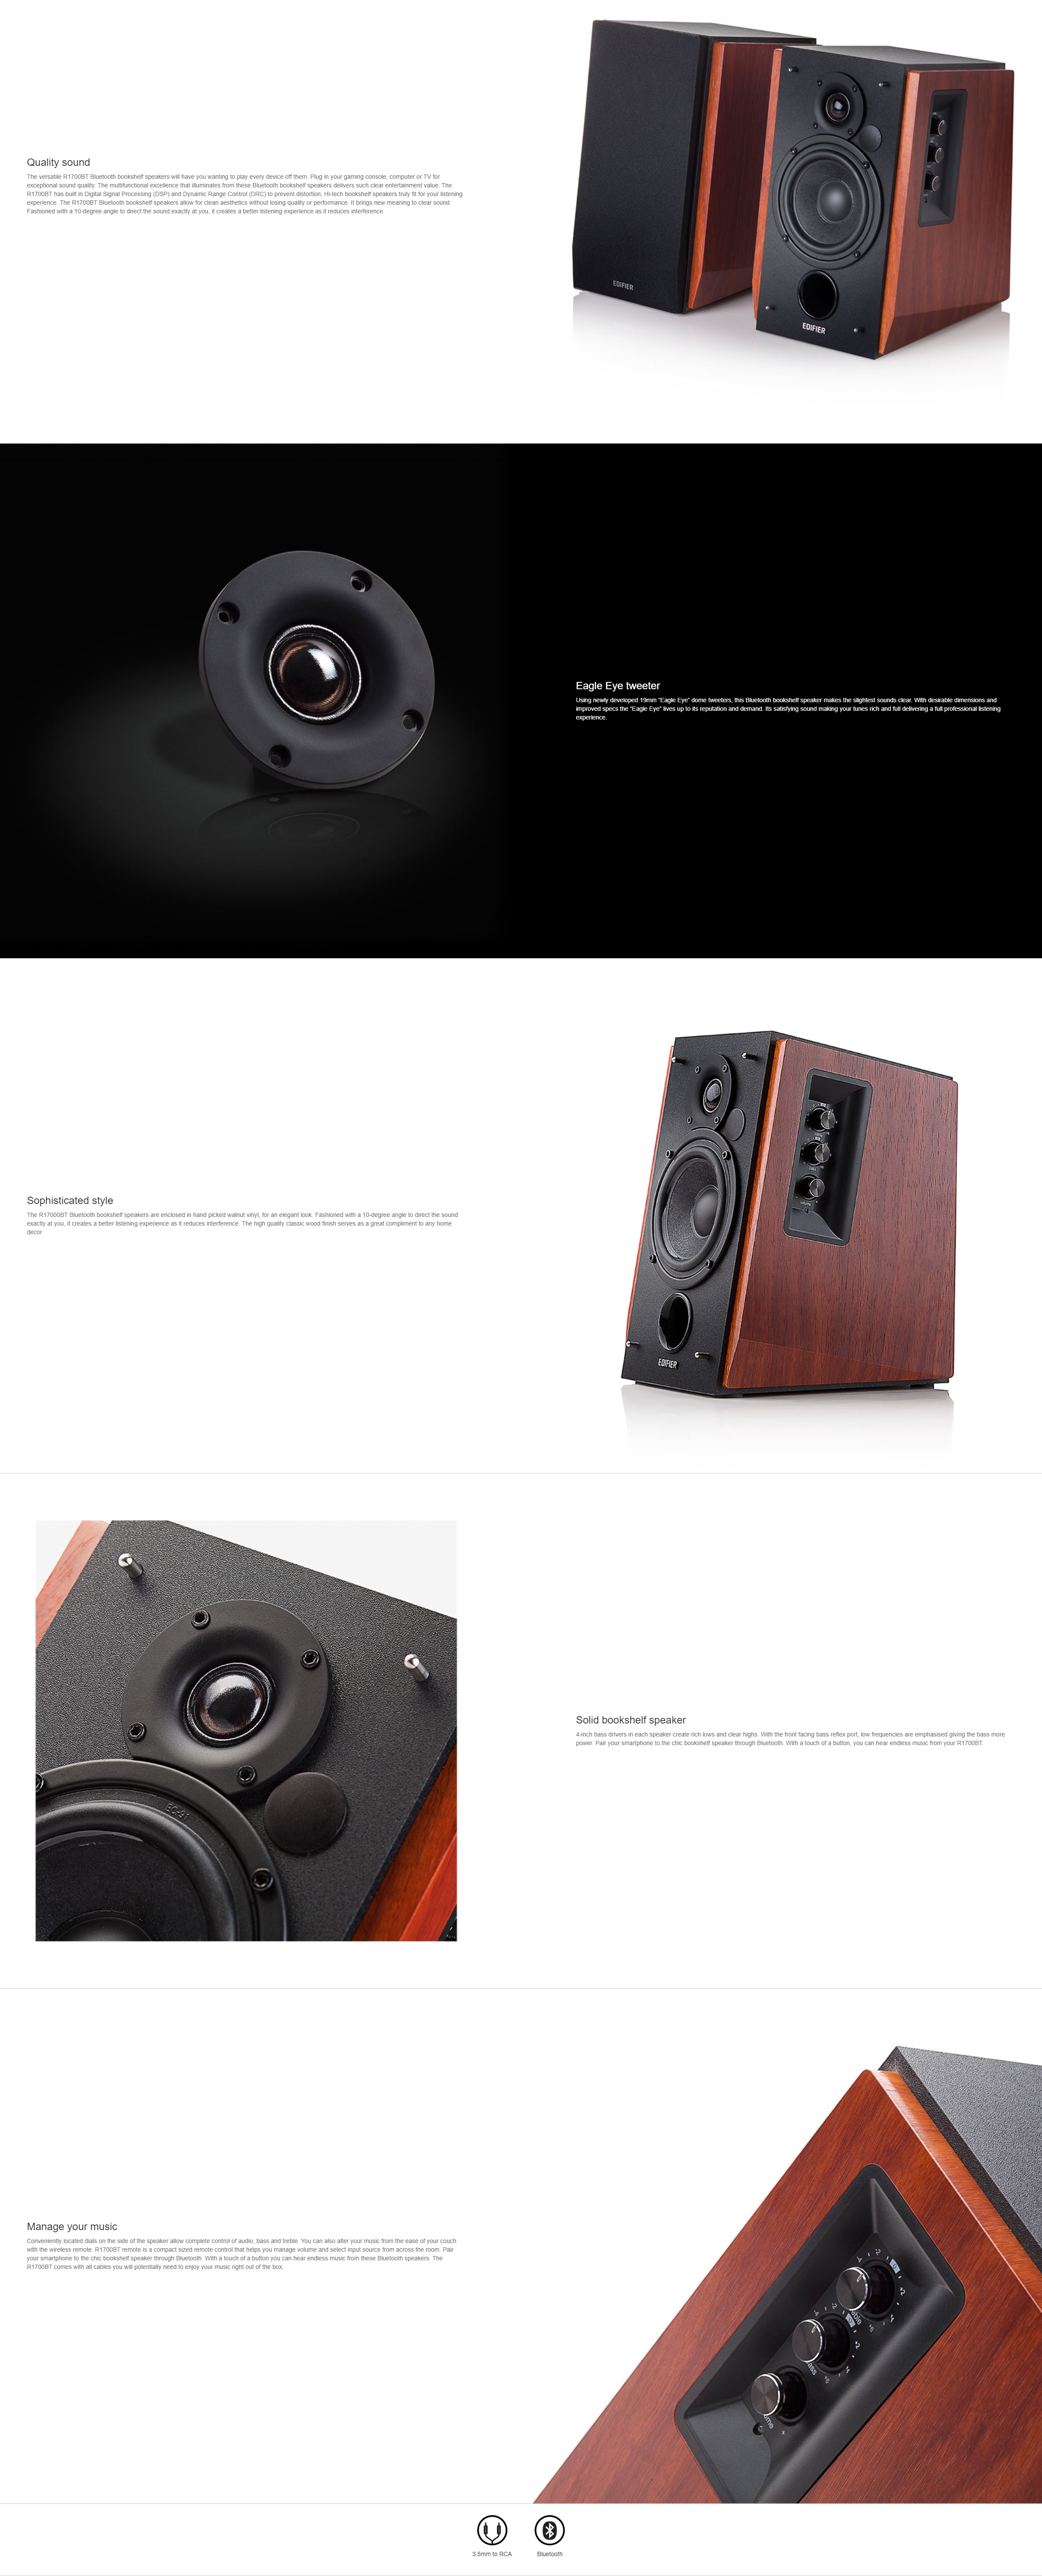 A large marketing image providing additional information about the product Edifier R1700BT 2.0 Lifestyle Studio Speakers - Black Edition - Additional alt info not provided